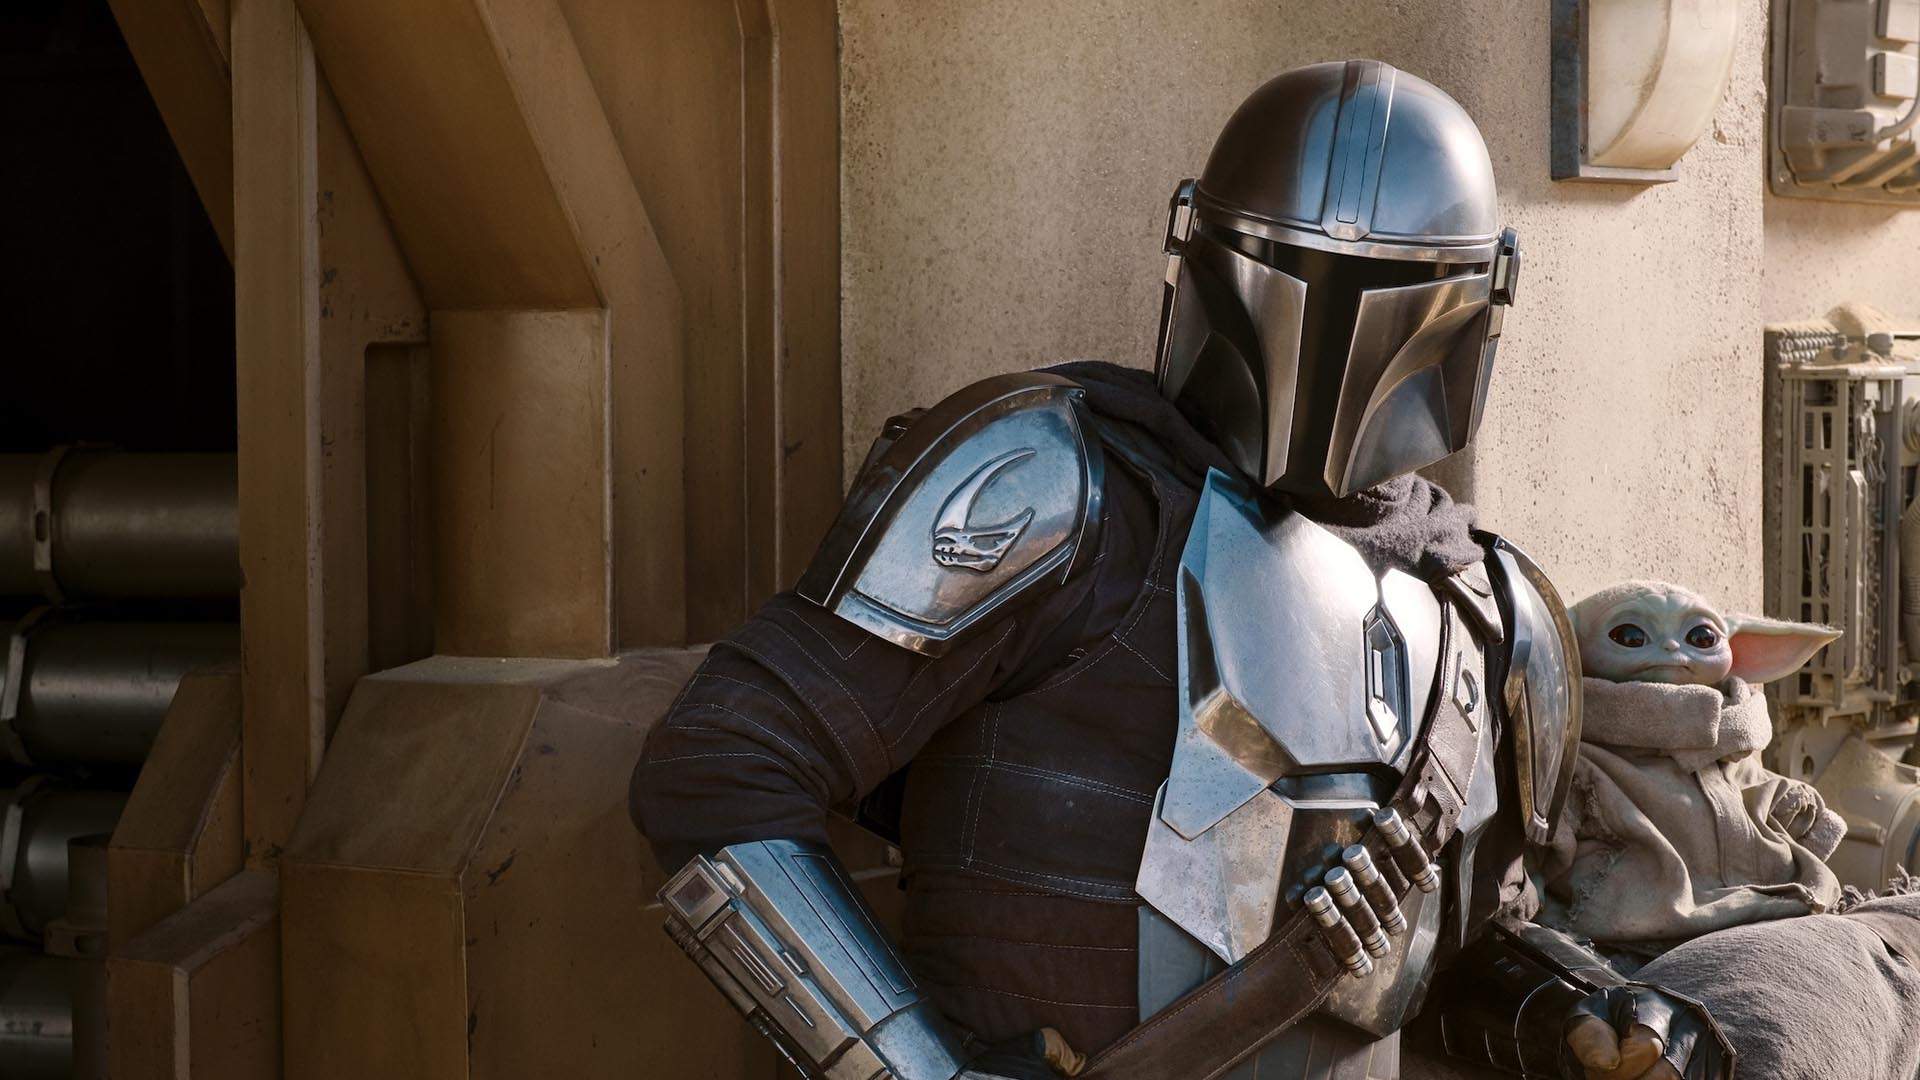 'The Mandalorian', 'The Crown' and 'WandaVision' Lead the 2021 Emmy Nominations